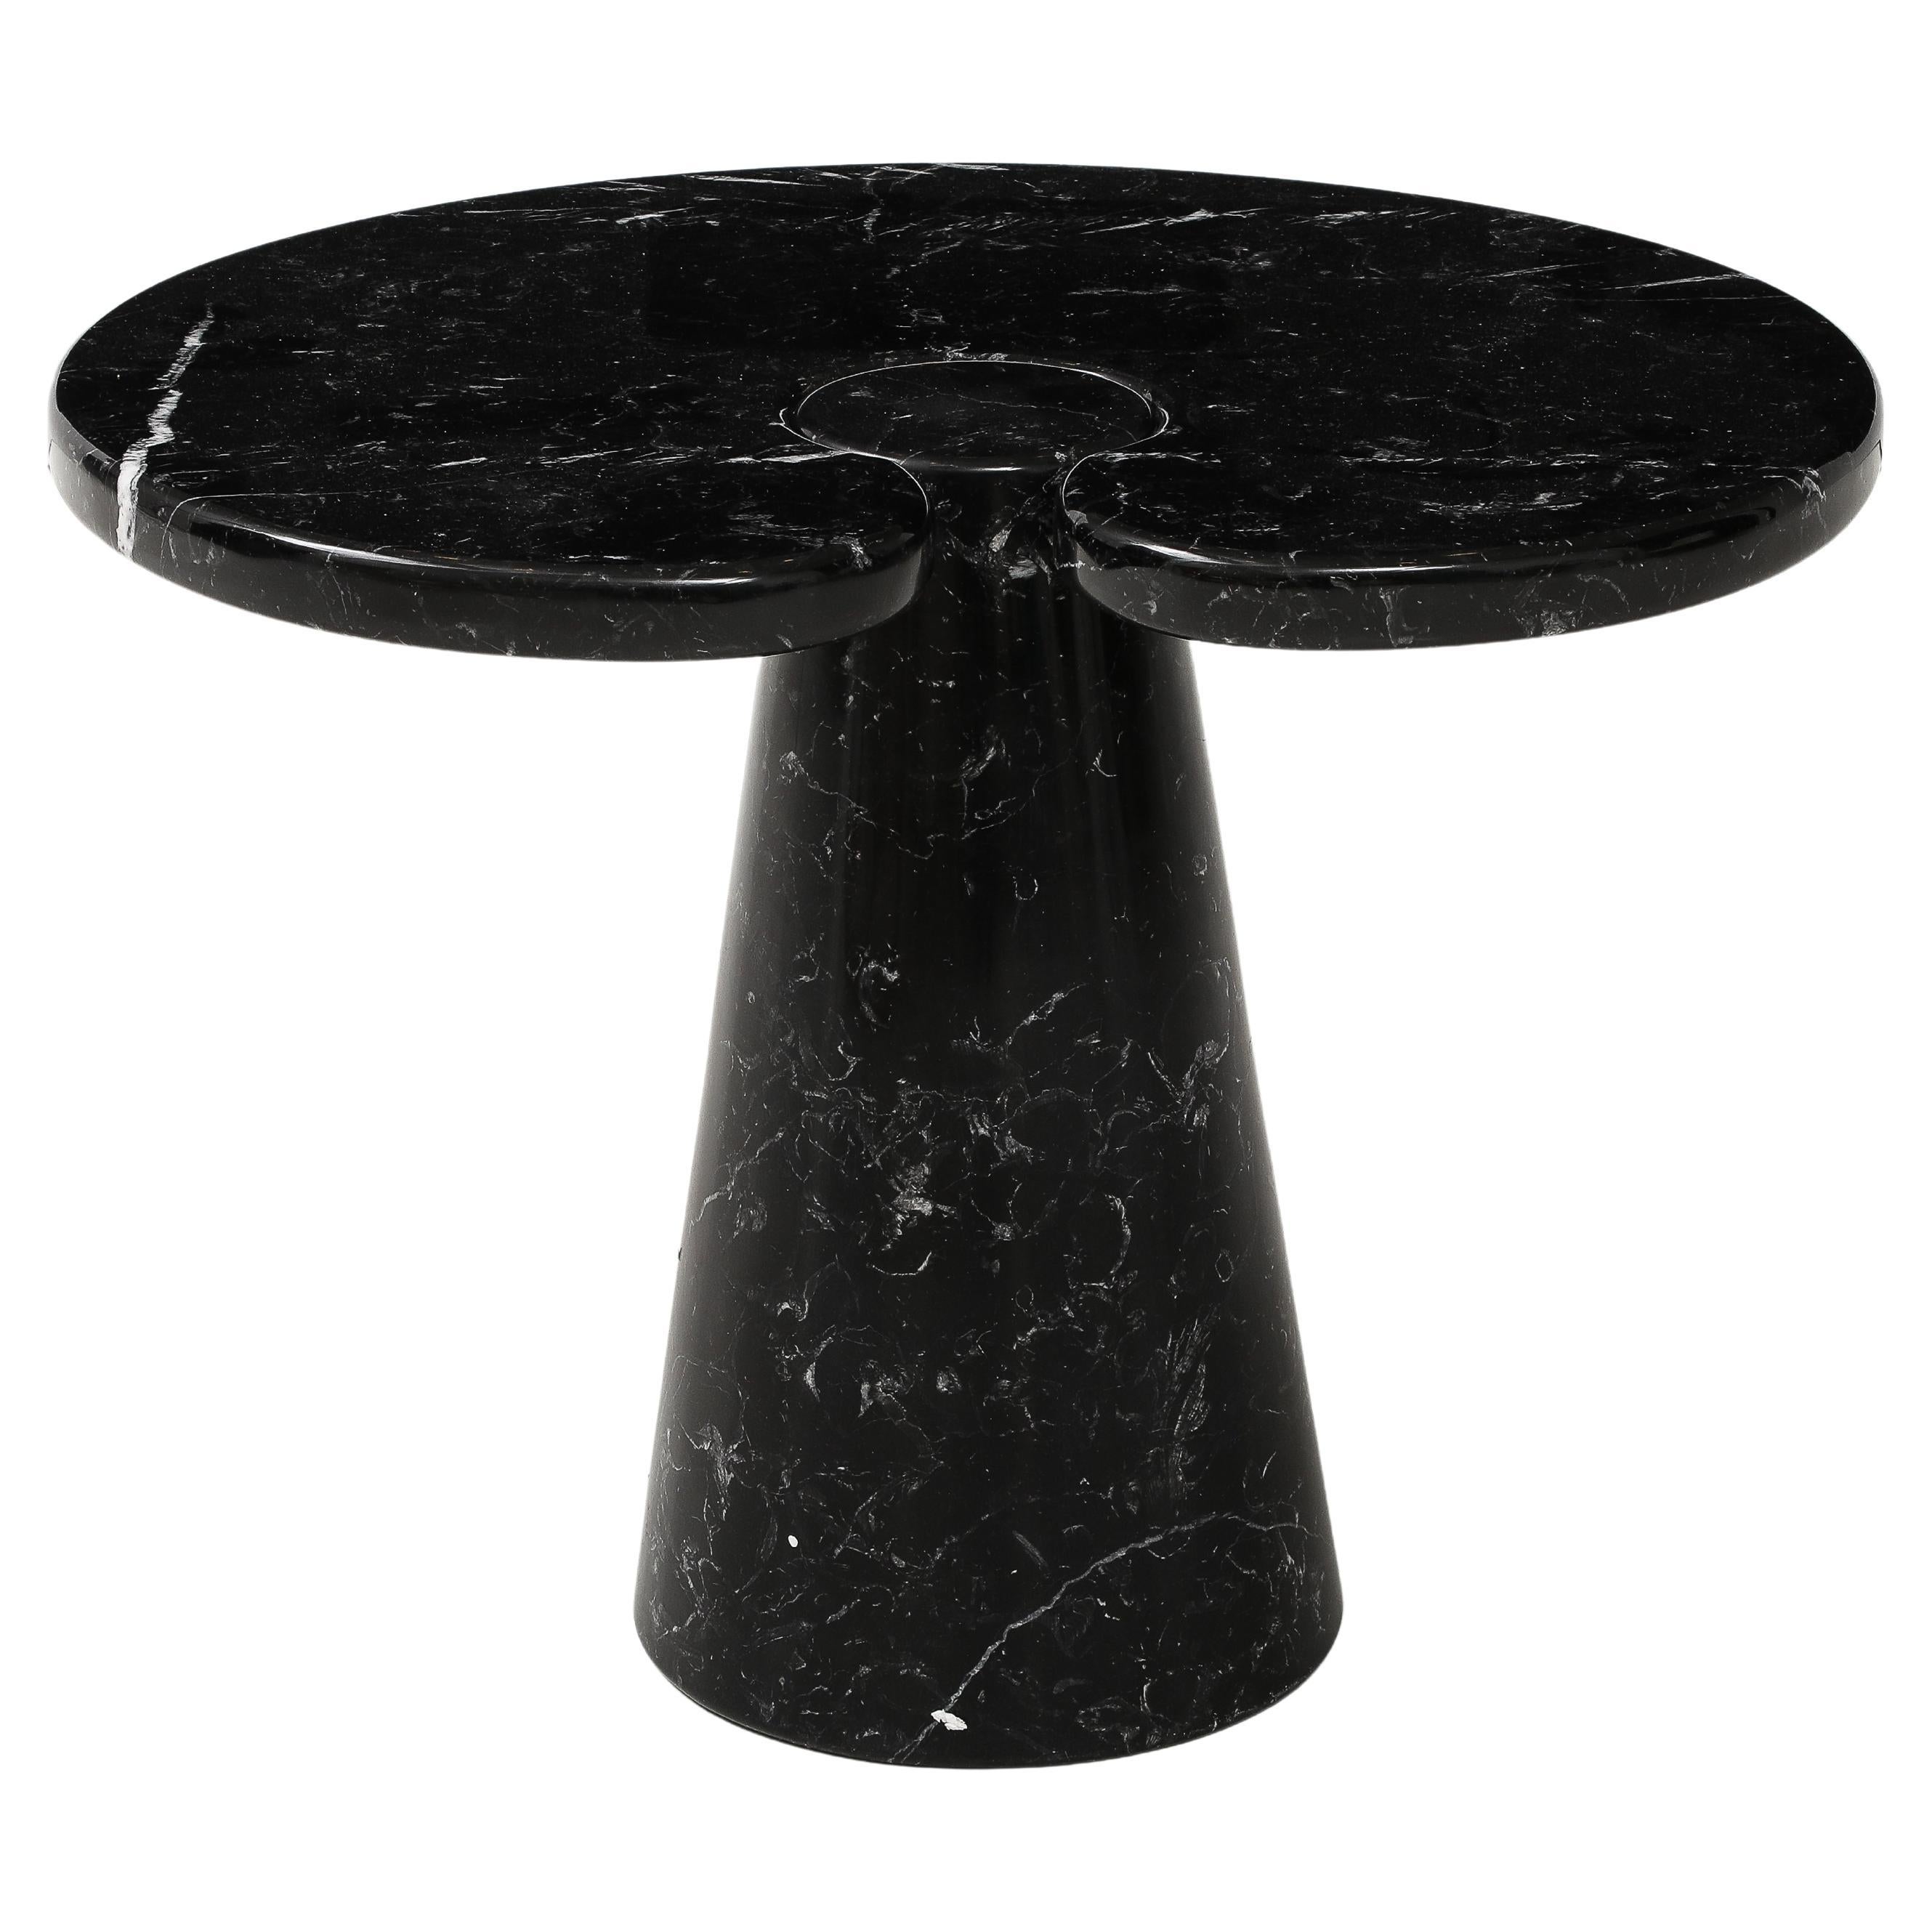 Angelo Mangiarotti Nero Marquina Marble Side Table from 'Eros' Series, 1971 For Sale